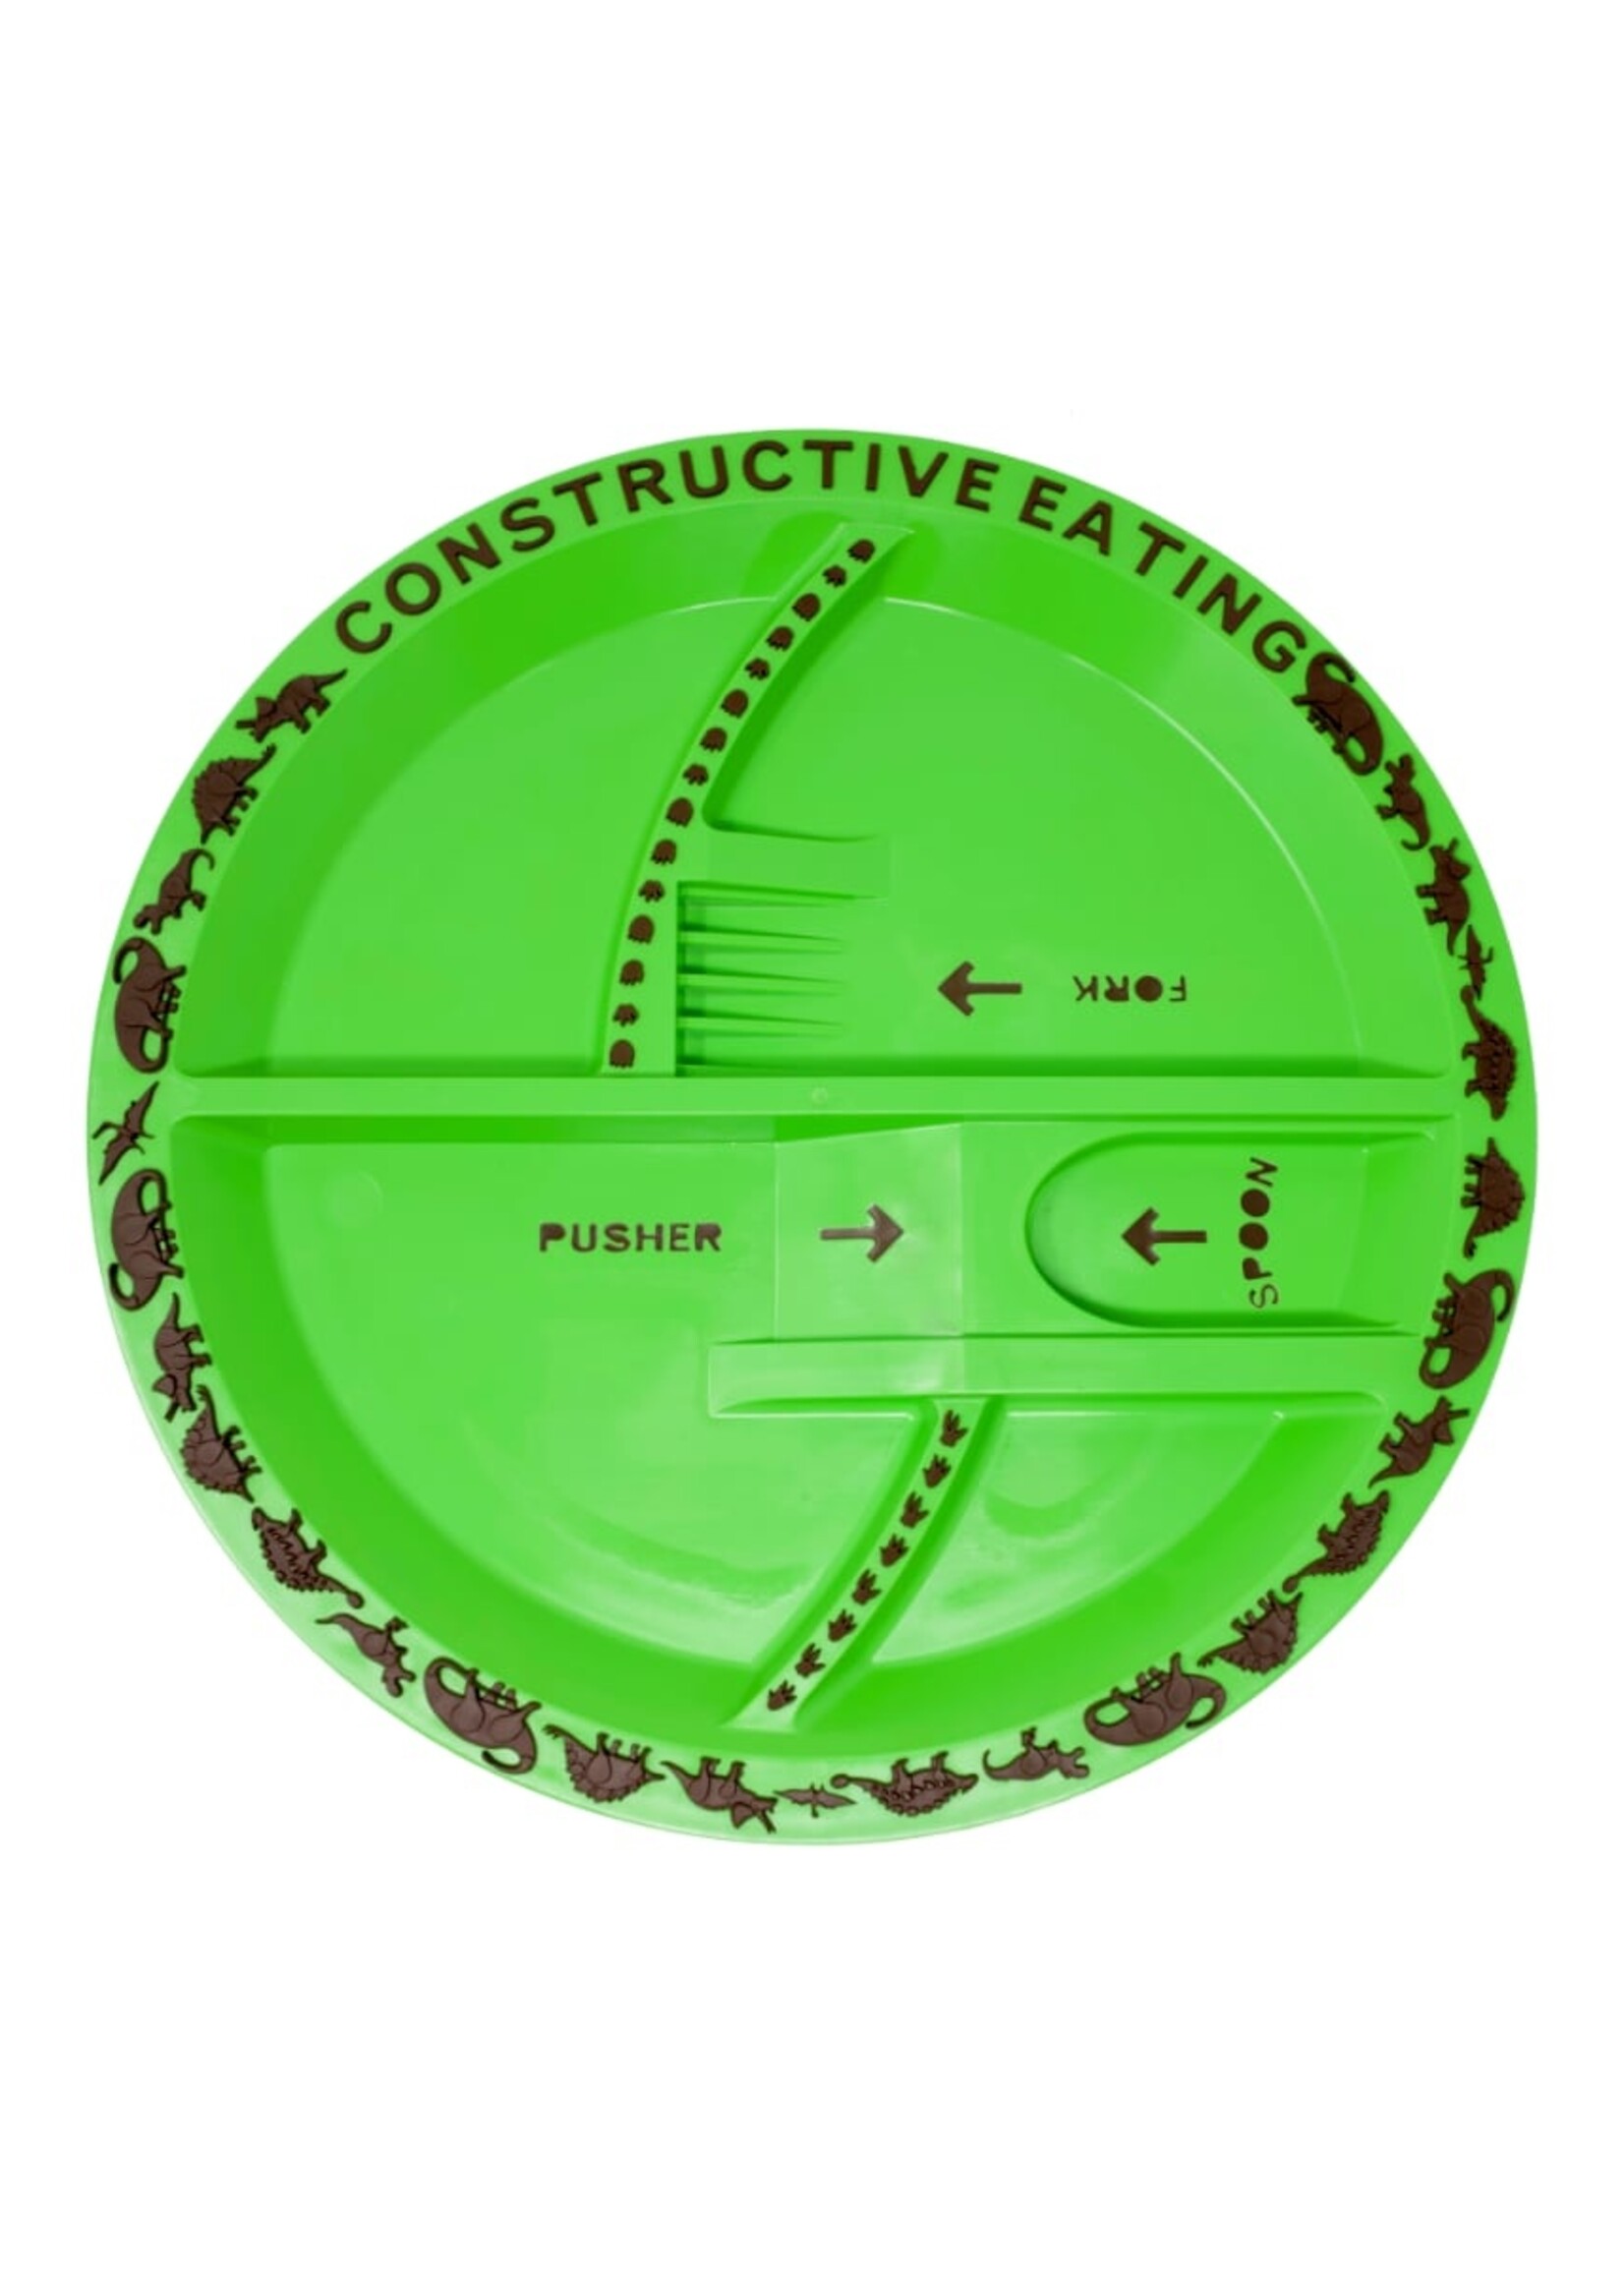 Constructive Eating Dino Plate